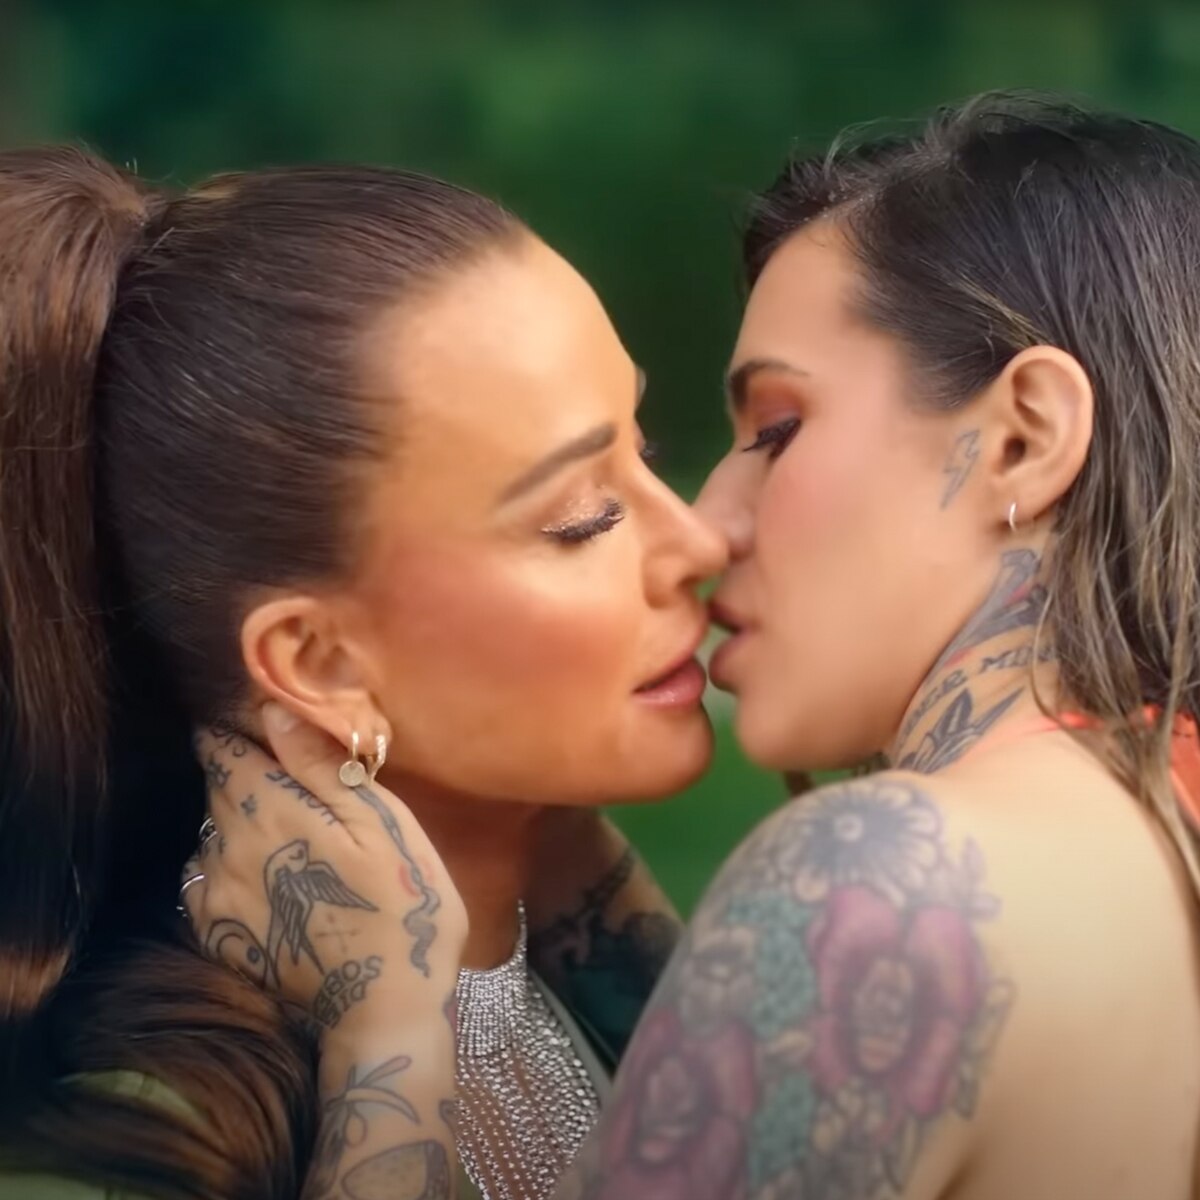 Kyle Richards and Morgan Wade Strip Down in Steamy New Music Video